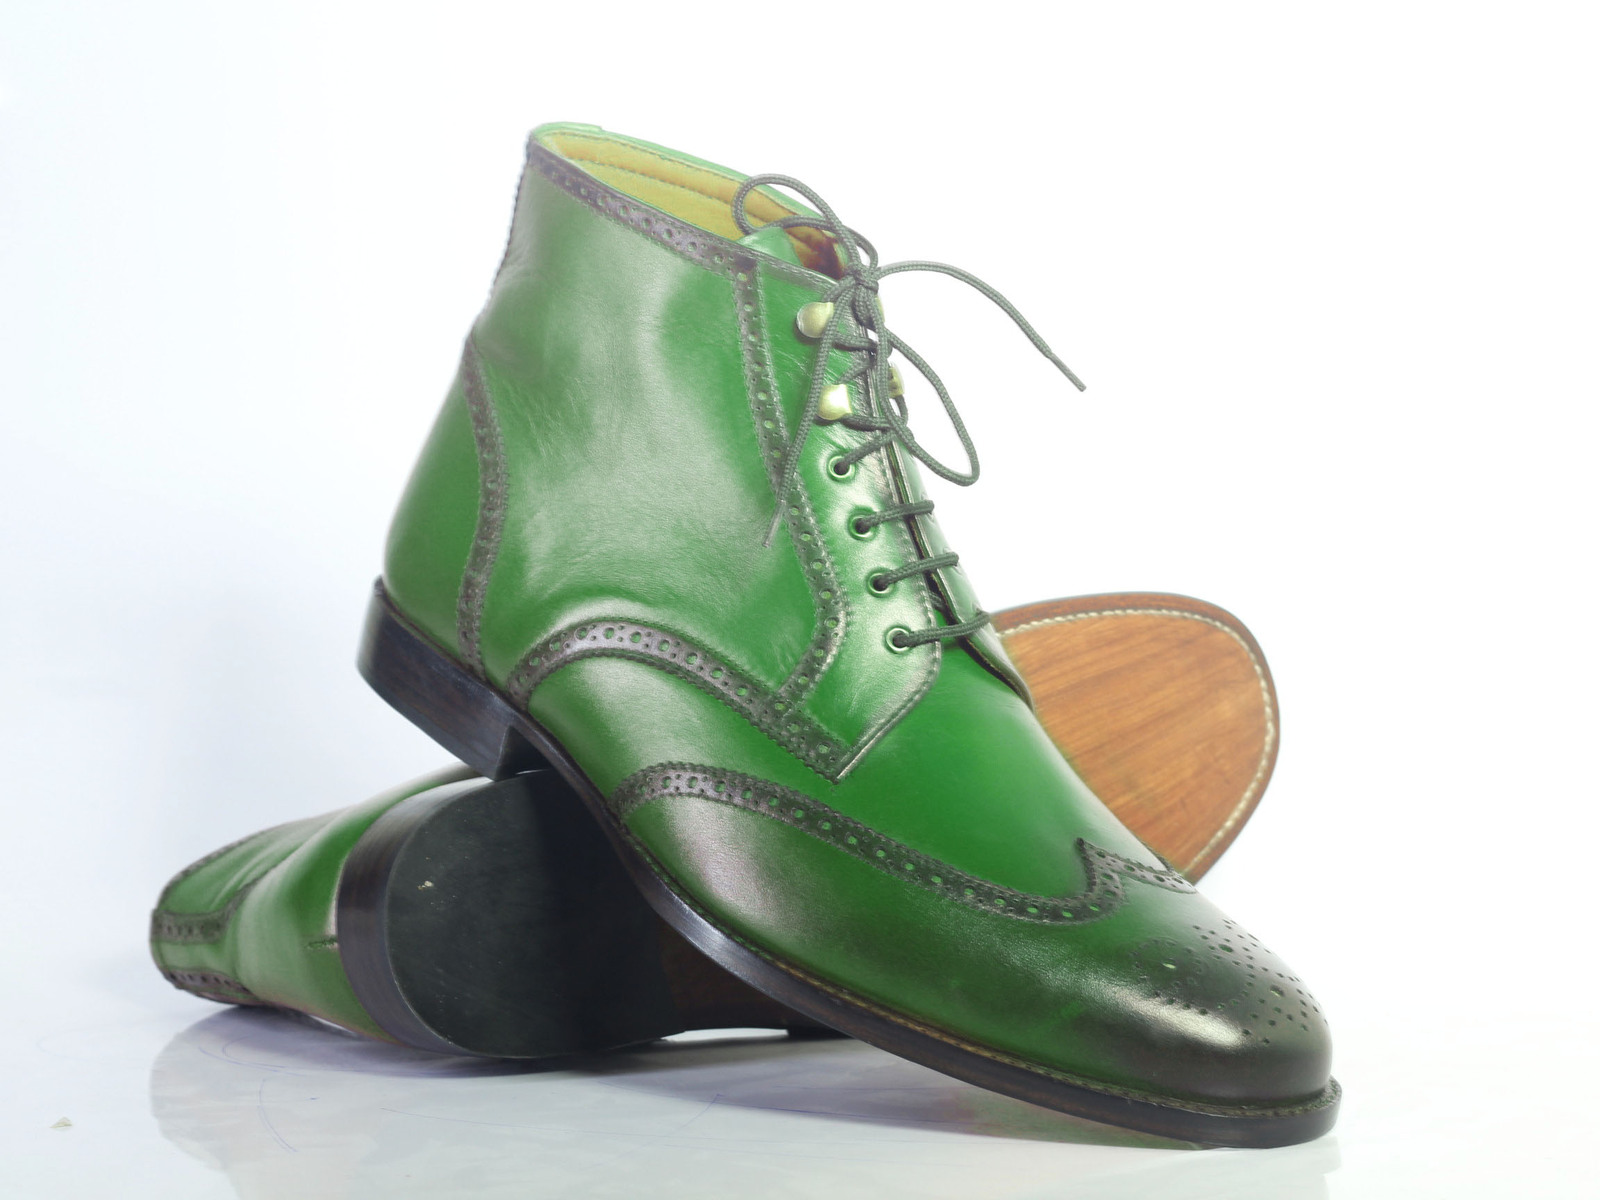 Handmade Men's Green Leather Chukka Boots, Men Wing Tip Brogue Toe Lace Up Boots